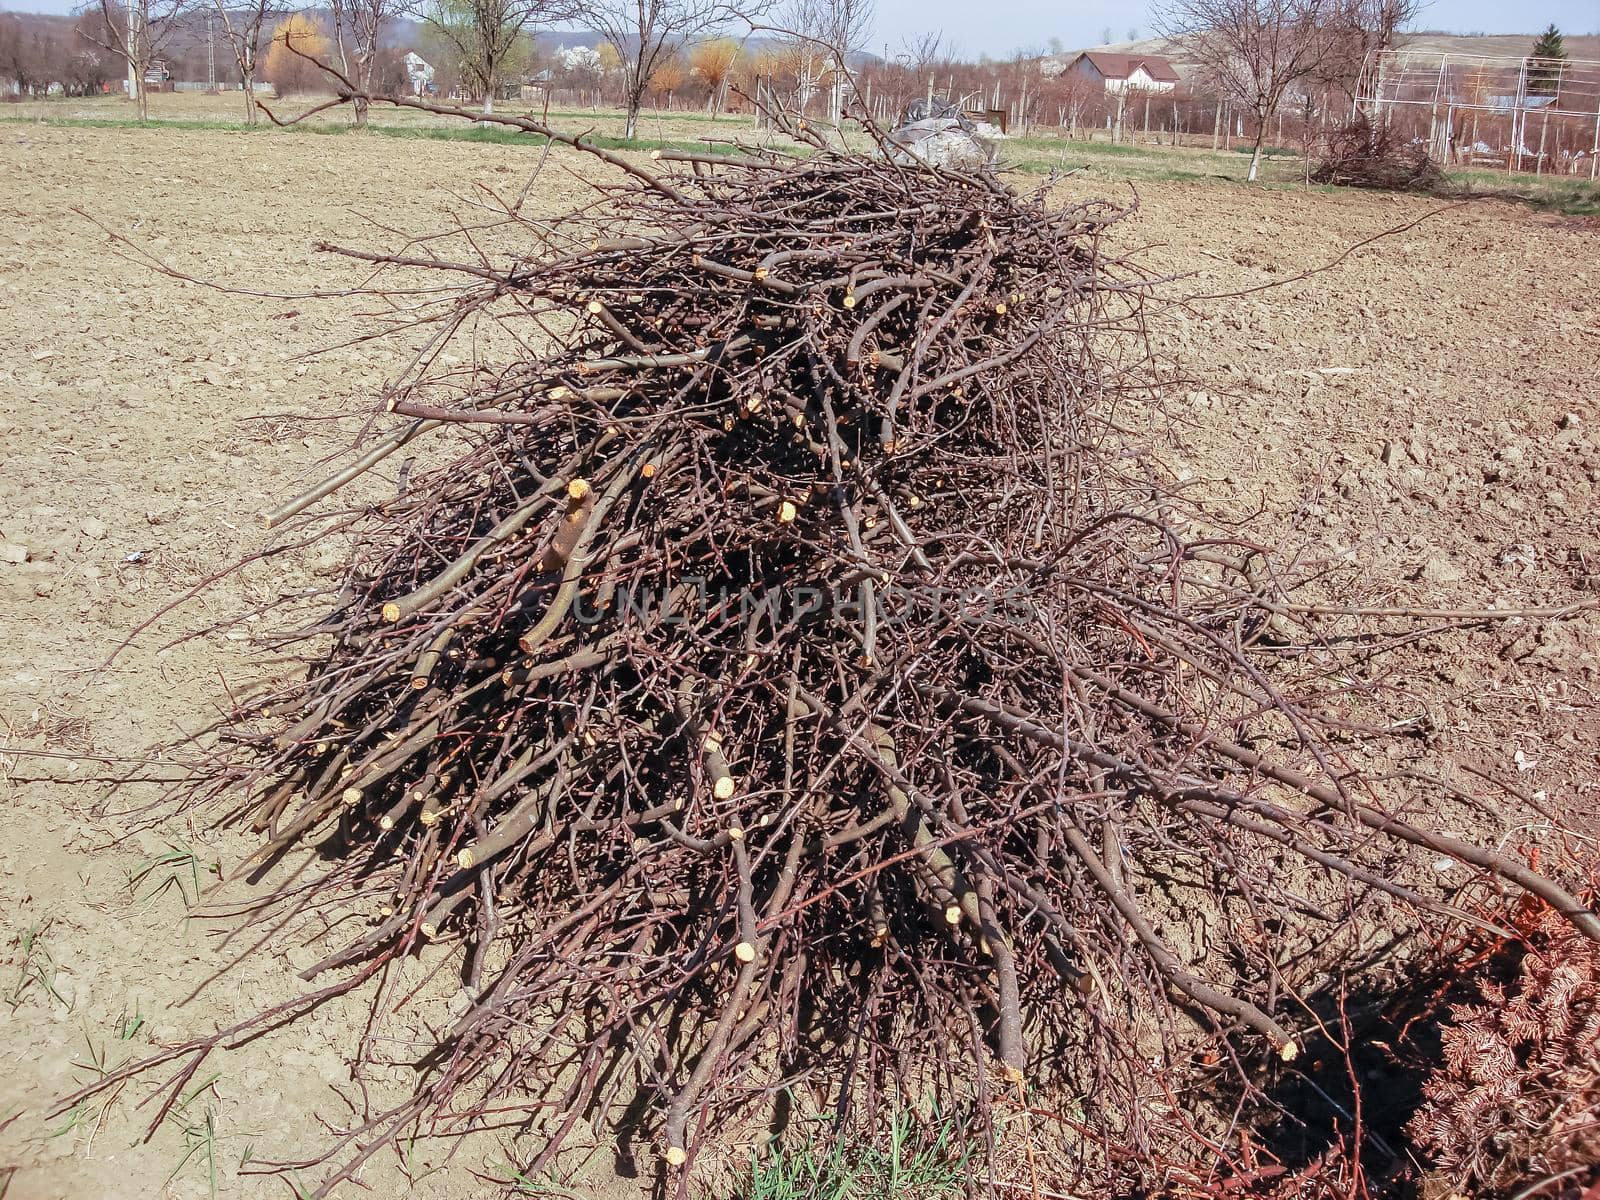 Pile of twigs and branches isolated in garden.